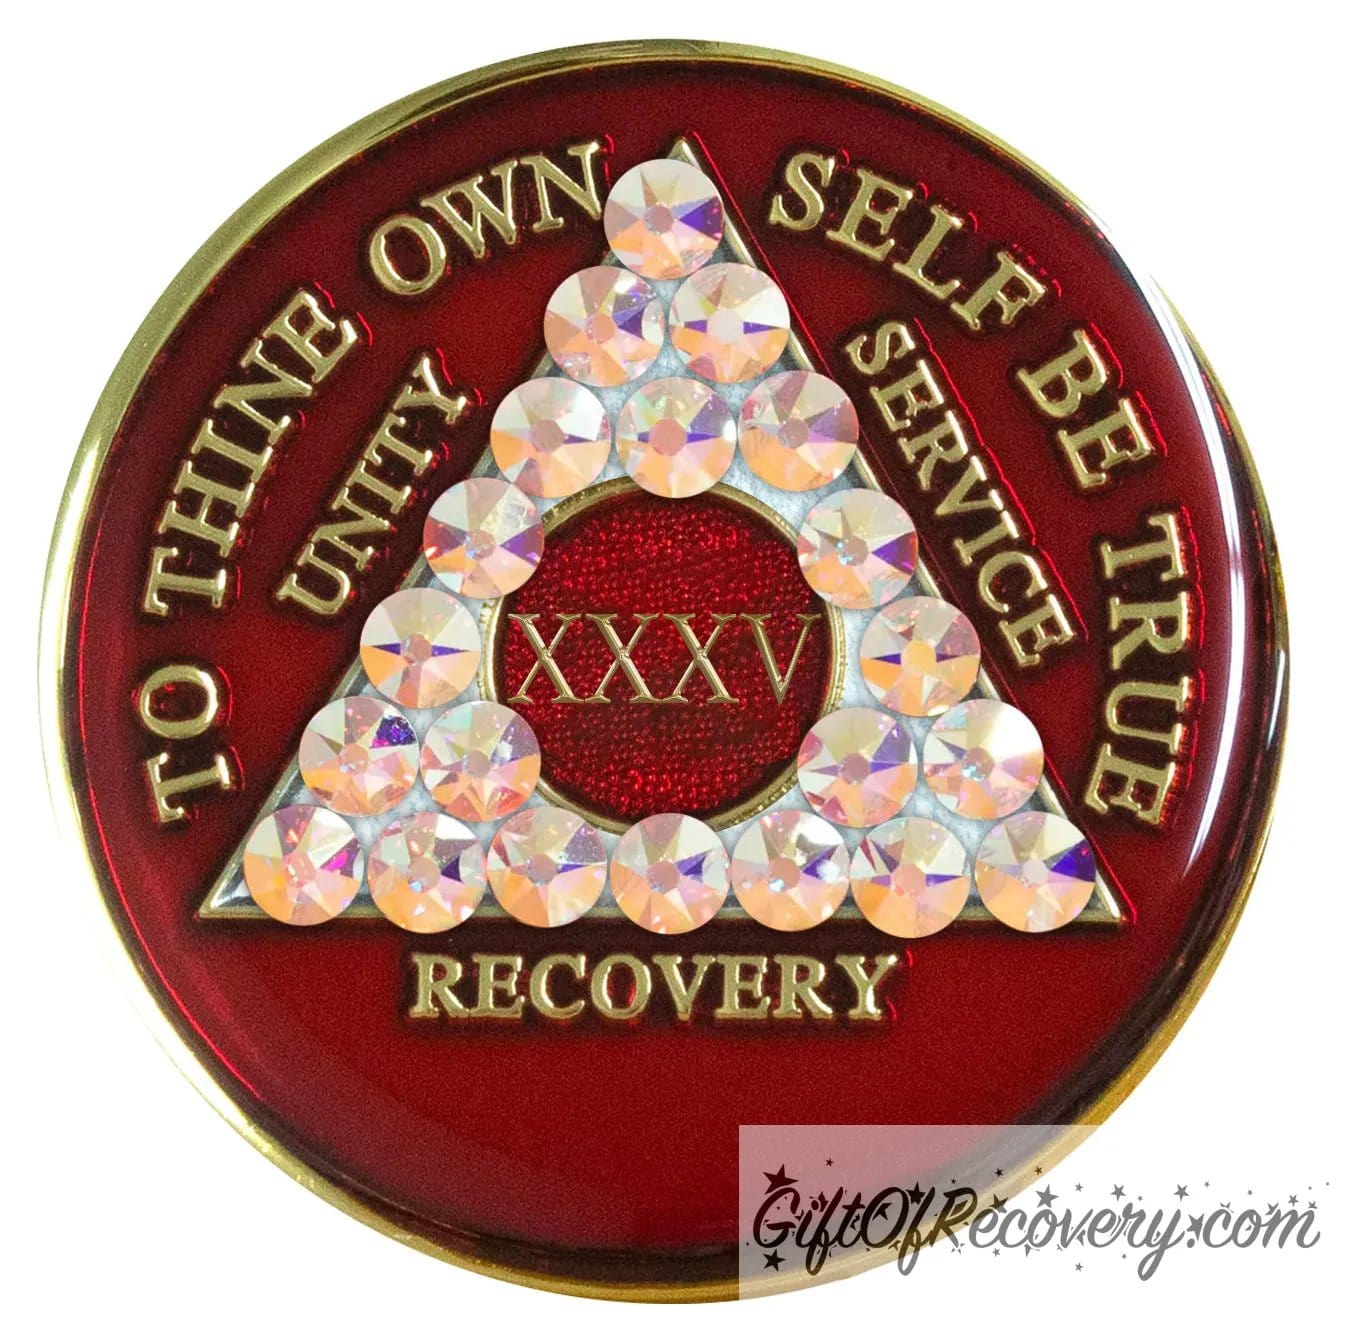 35 year AA medallion ruby red with 21 Aurora Borealis genuine crystals in the shape of the triangle and to thine own self be true, unity, service, recovery, and roman numeral are embossed with 14k gold-plated brass, the medallion is sealed with resin for a shiny finish that lasts.